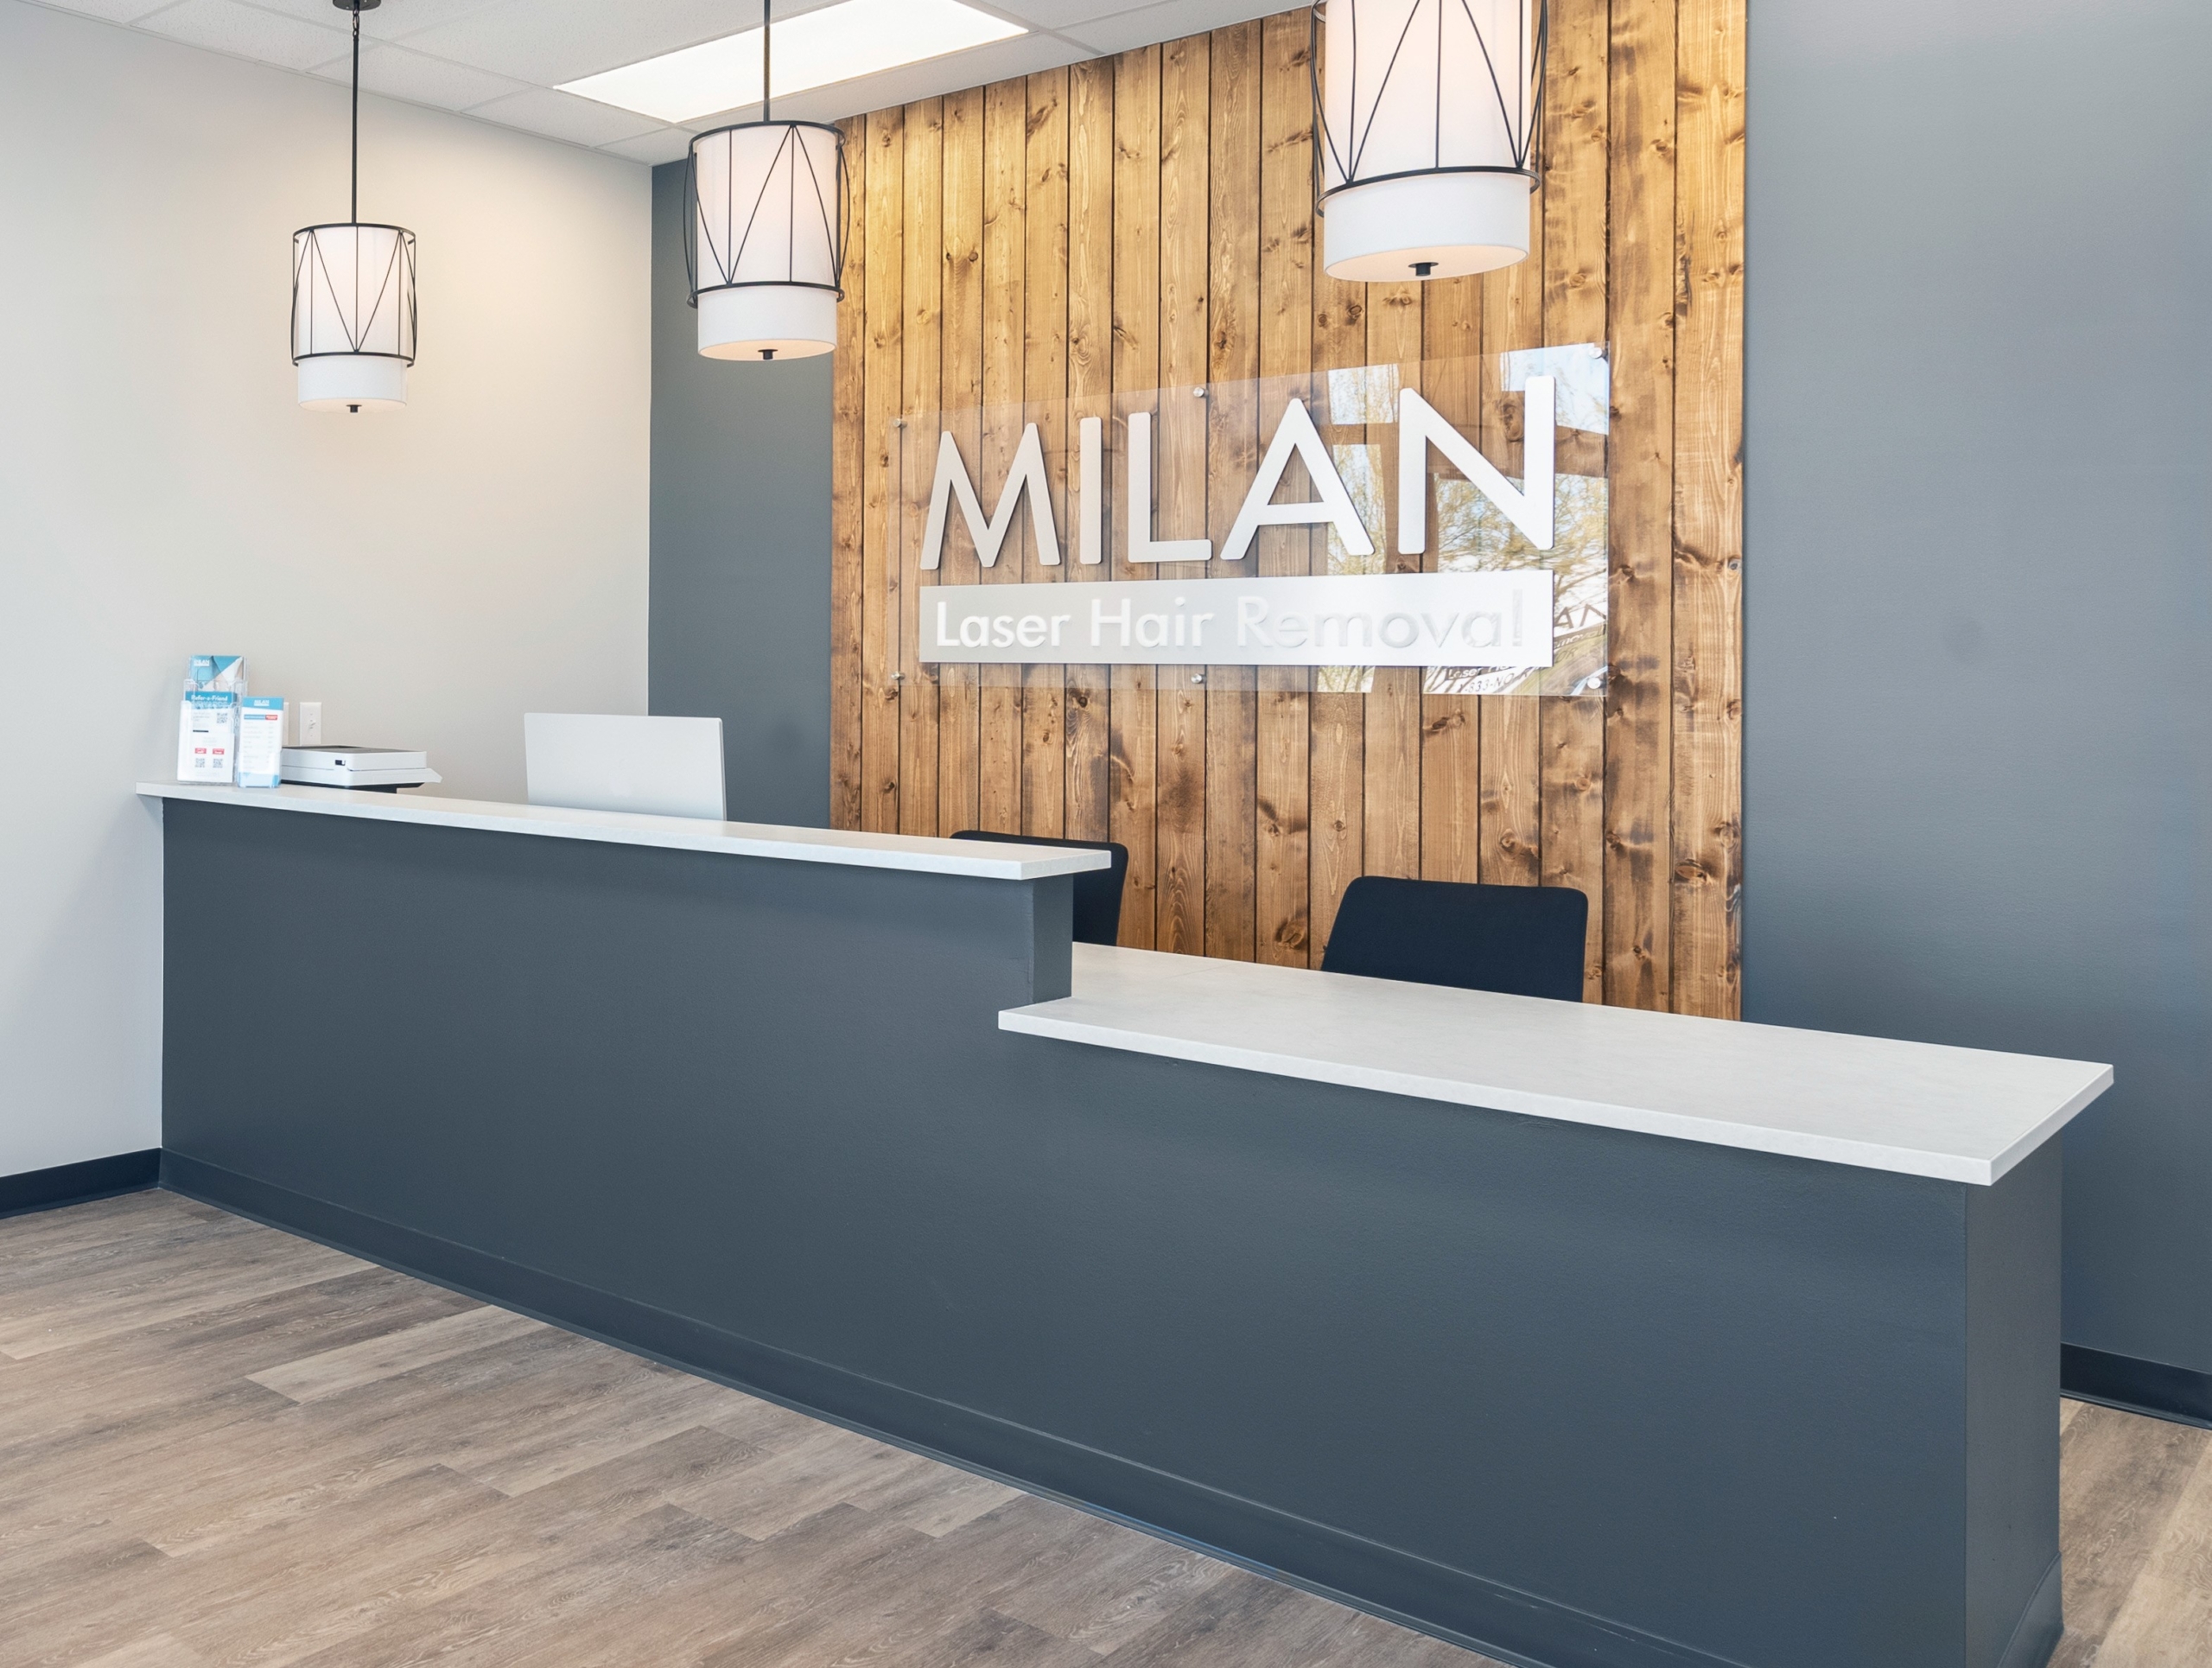 Milan Laser Hair Removal built by CAM Development Group